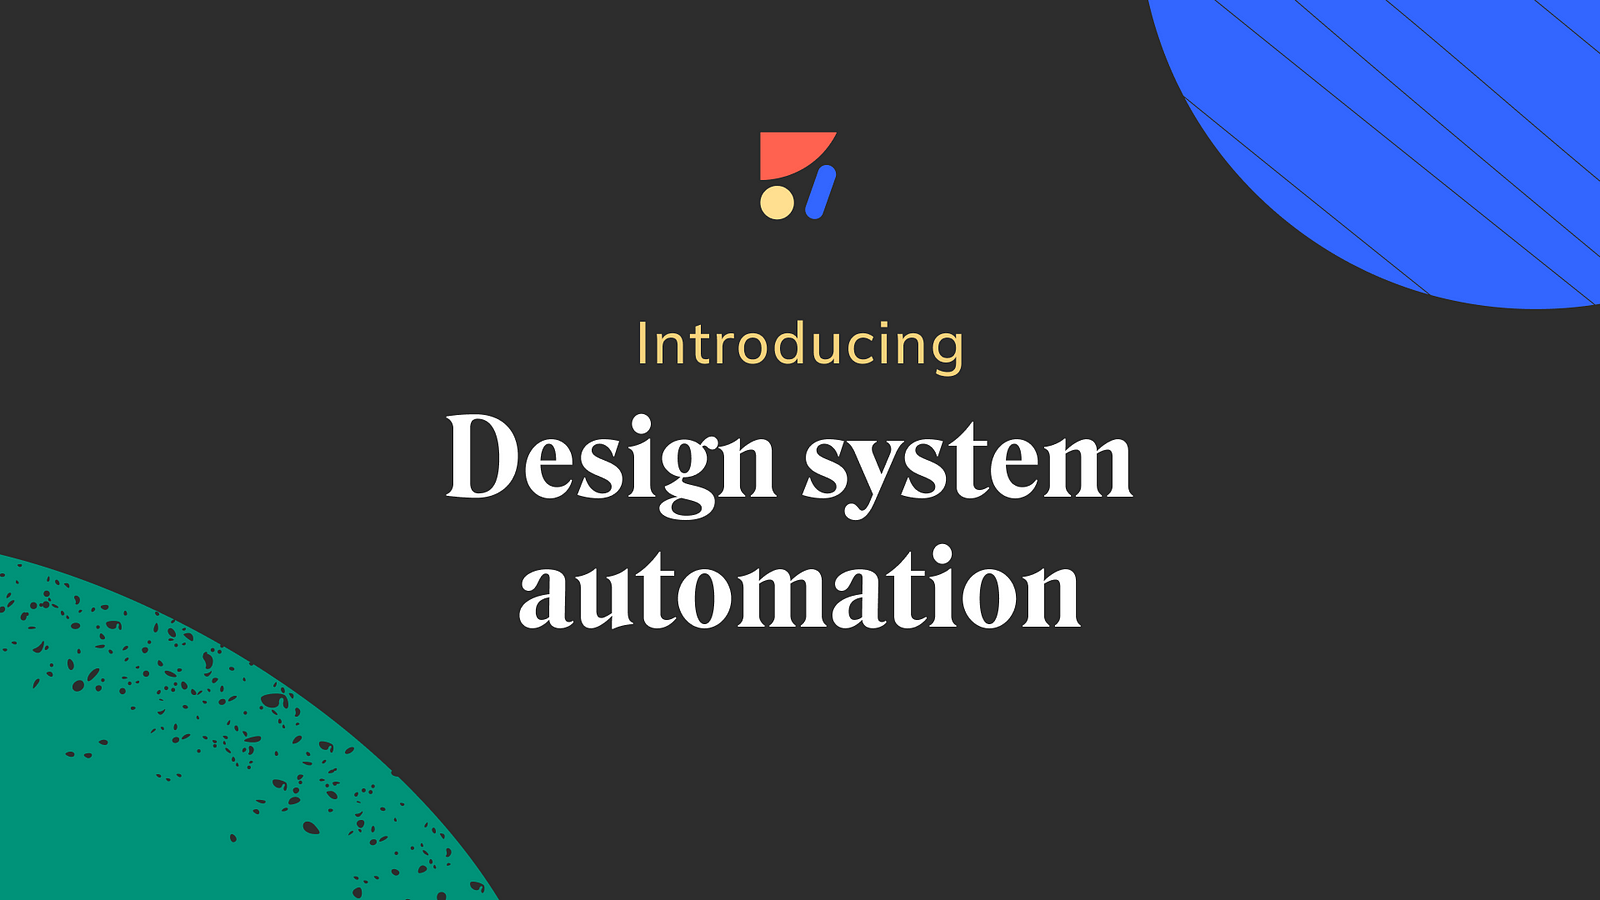 Introducing Design system automation